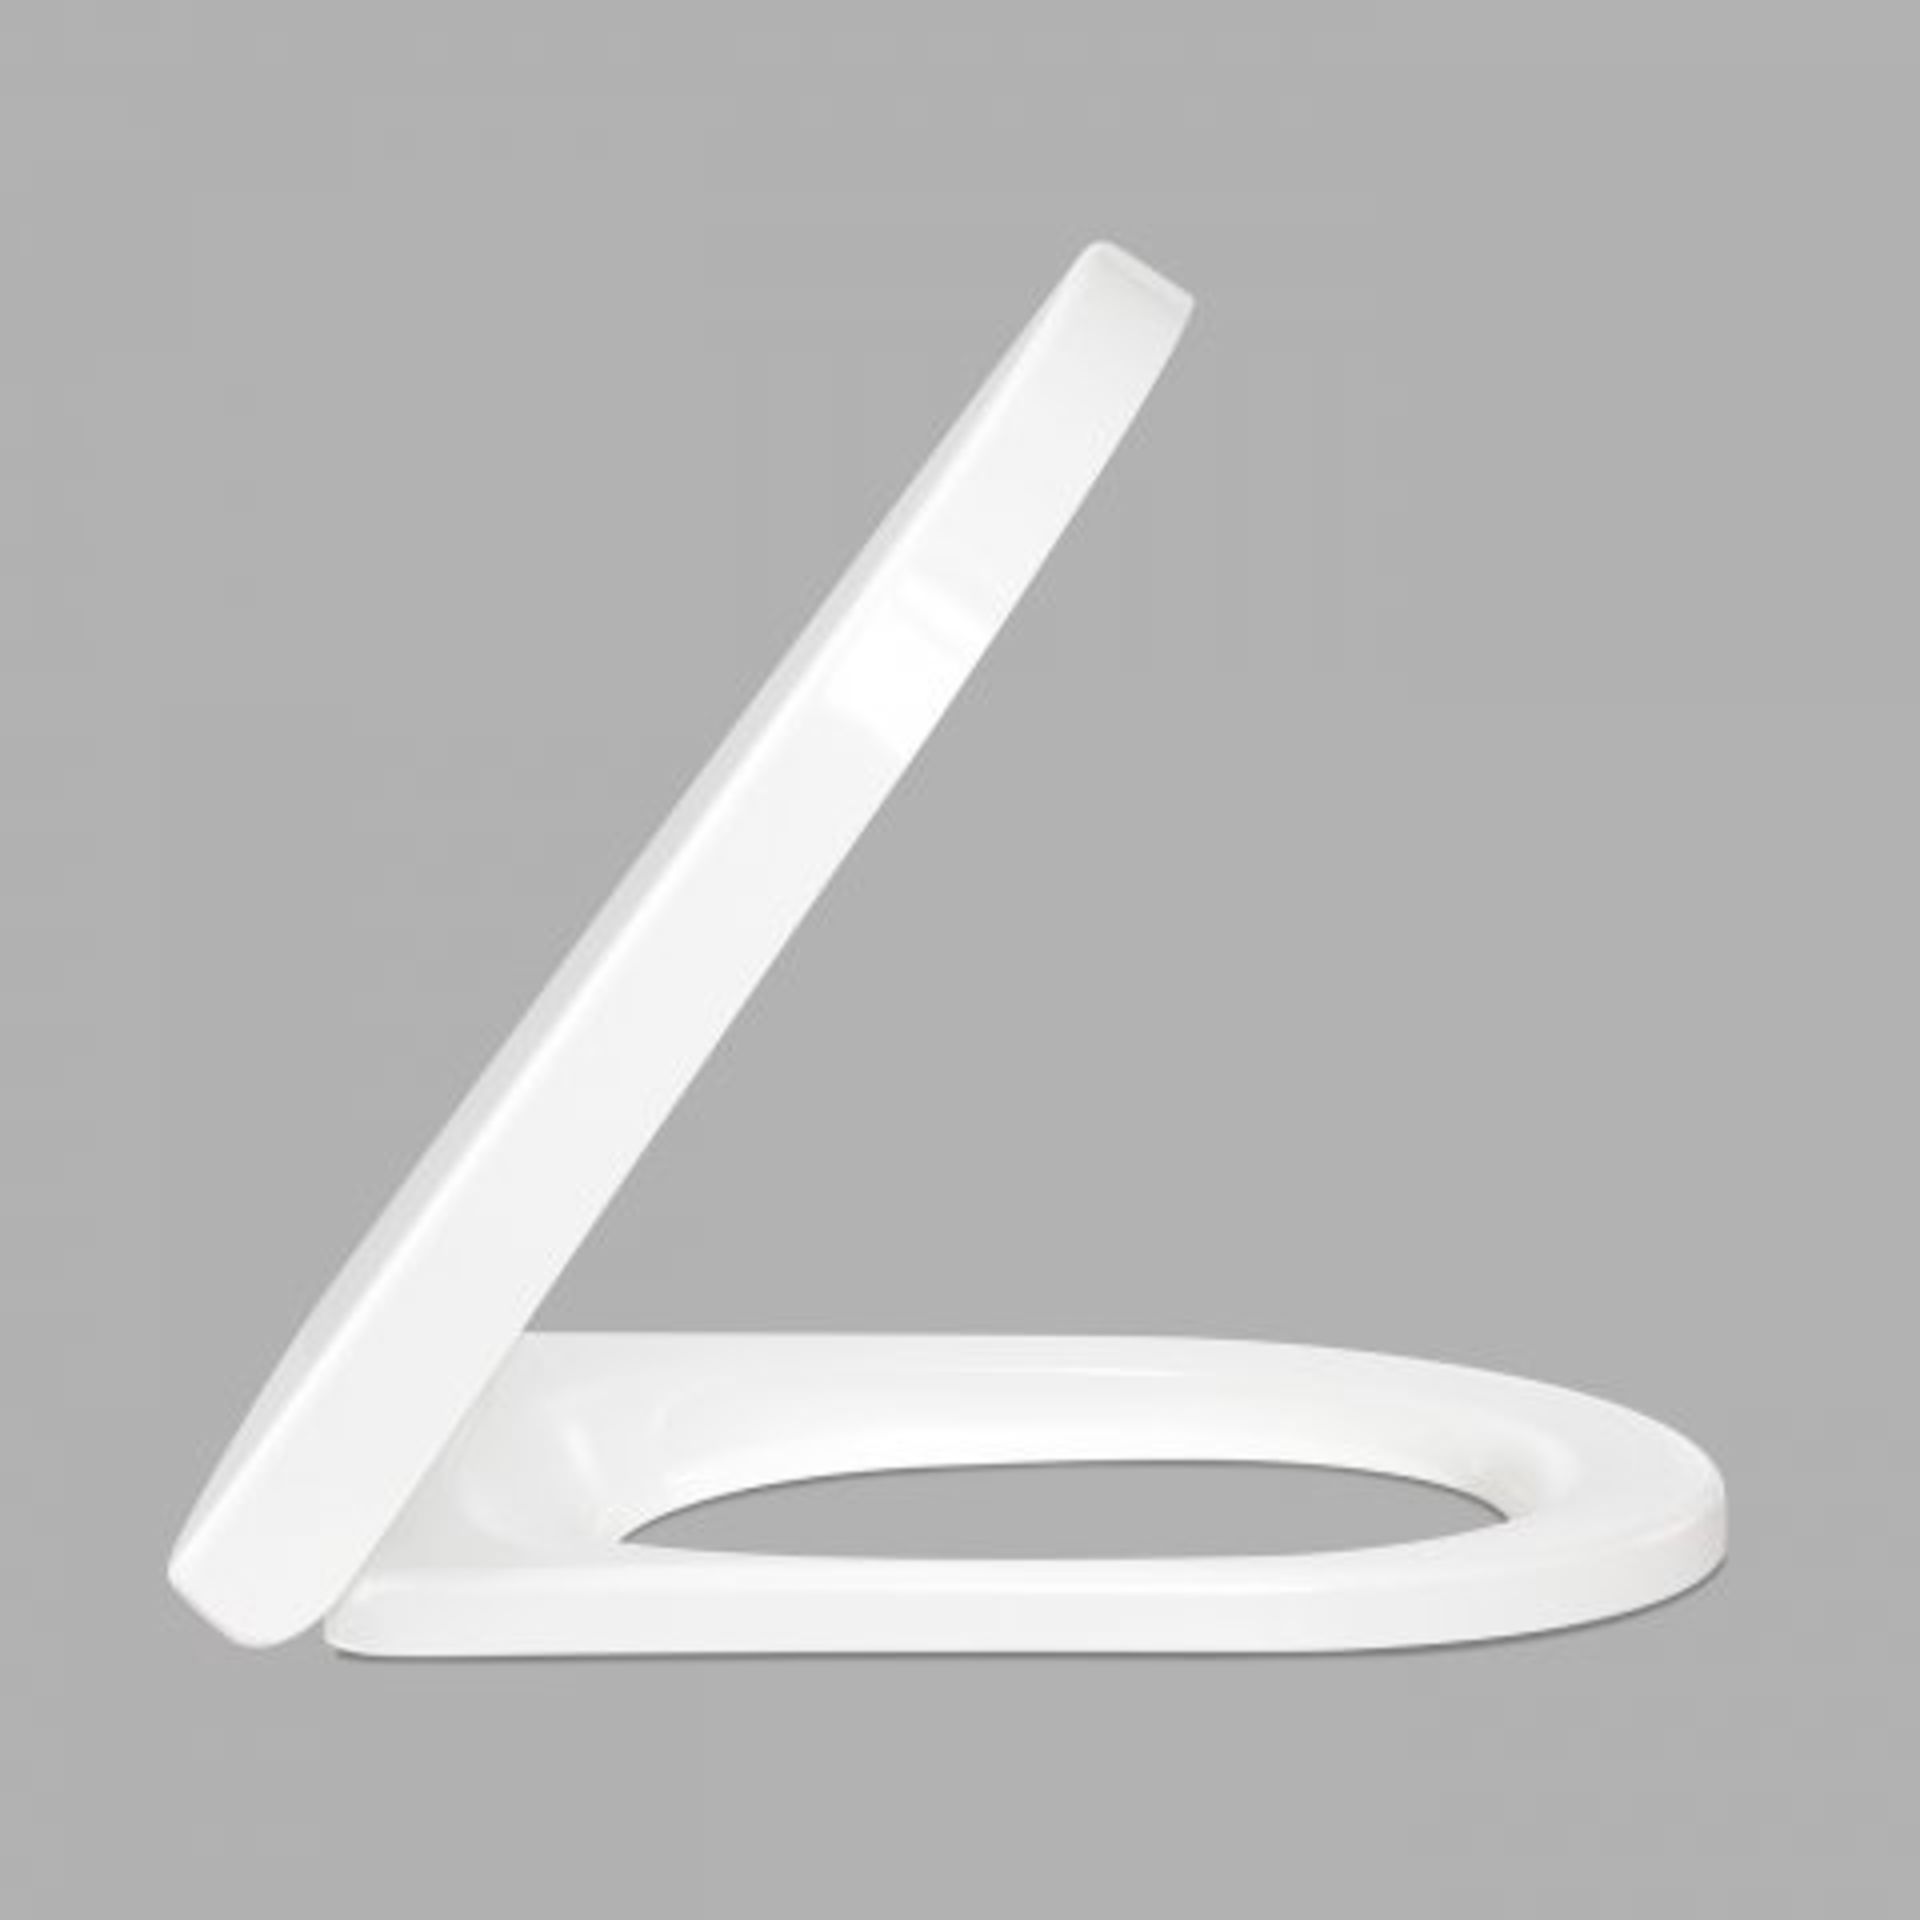 (L133) Lyon II Toilet Seat - Soft Closing. RRP £79.99. Our luxury Lyon II Soft Close Toilet Seat - Image 2 of 2